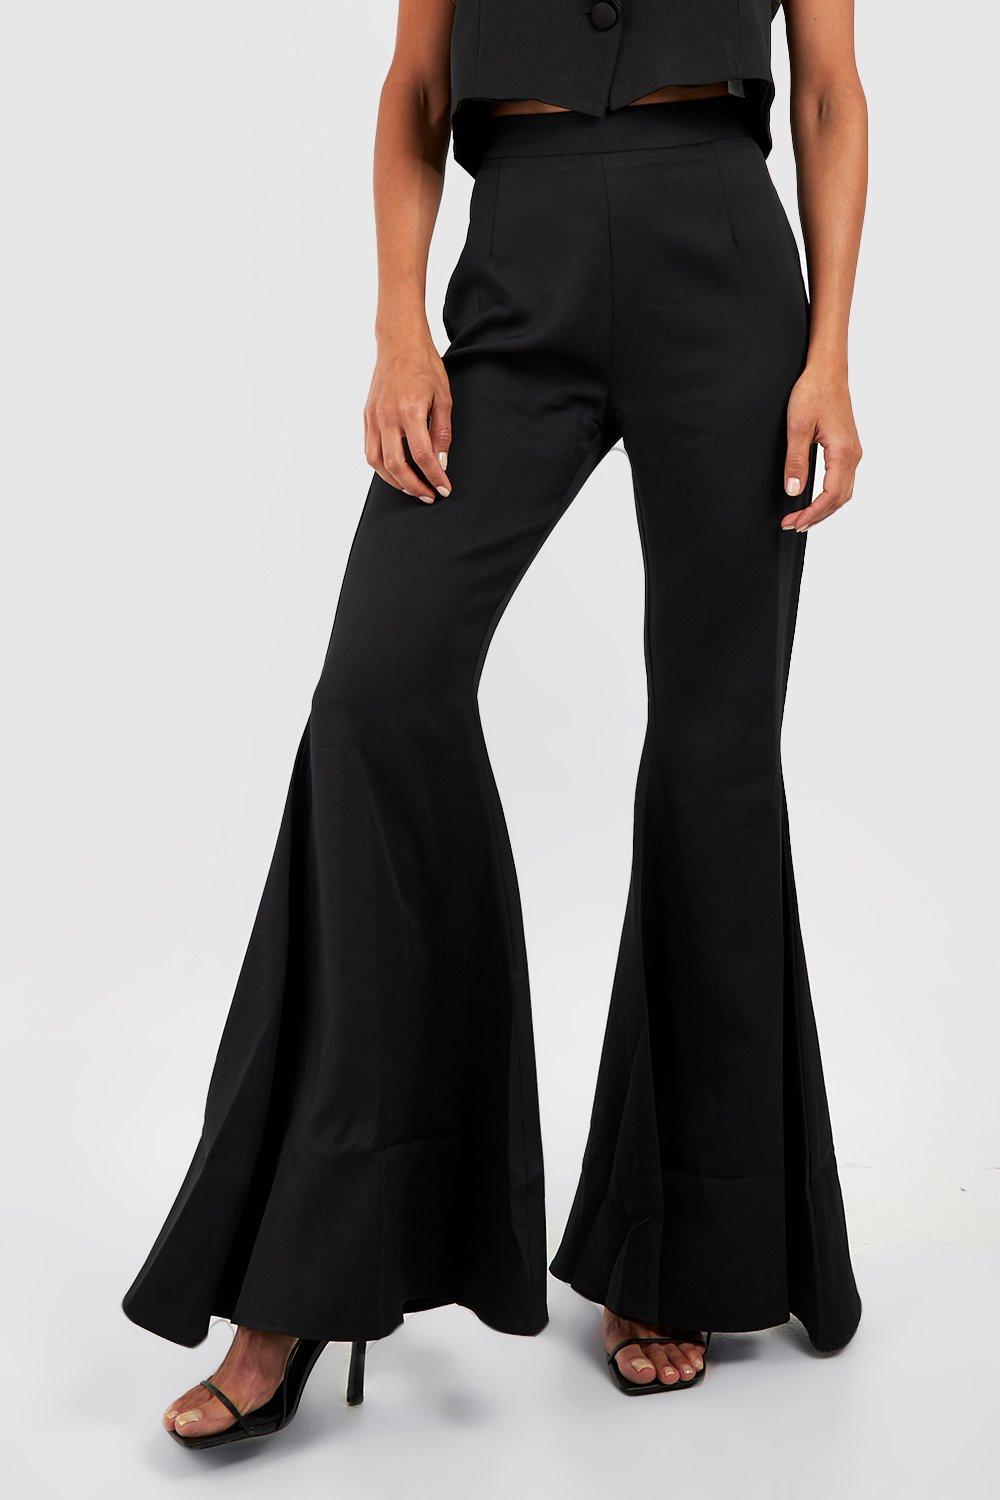 Black Woven High Waisted Flared Trousers